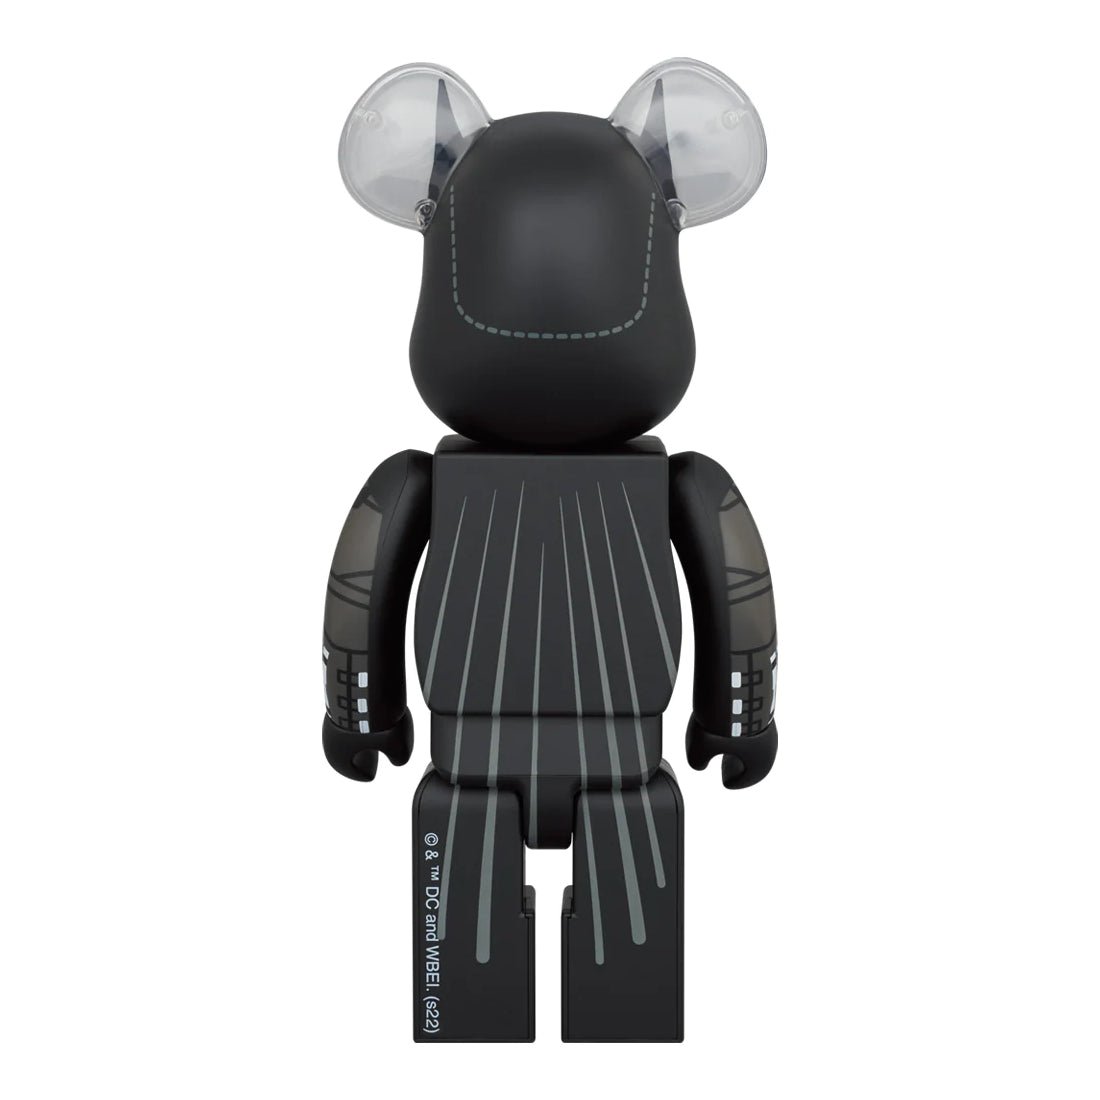 (Pre-Owned) BE@RBRICK - The Batman - مجسم - Store 974 | ستور ٩٧٤